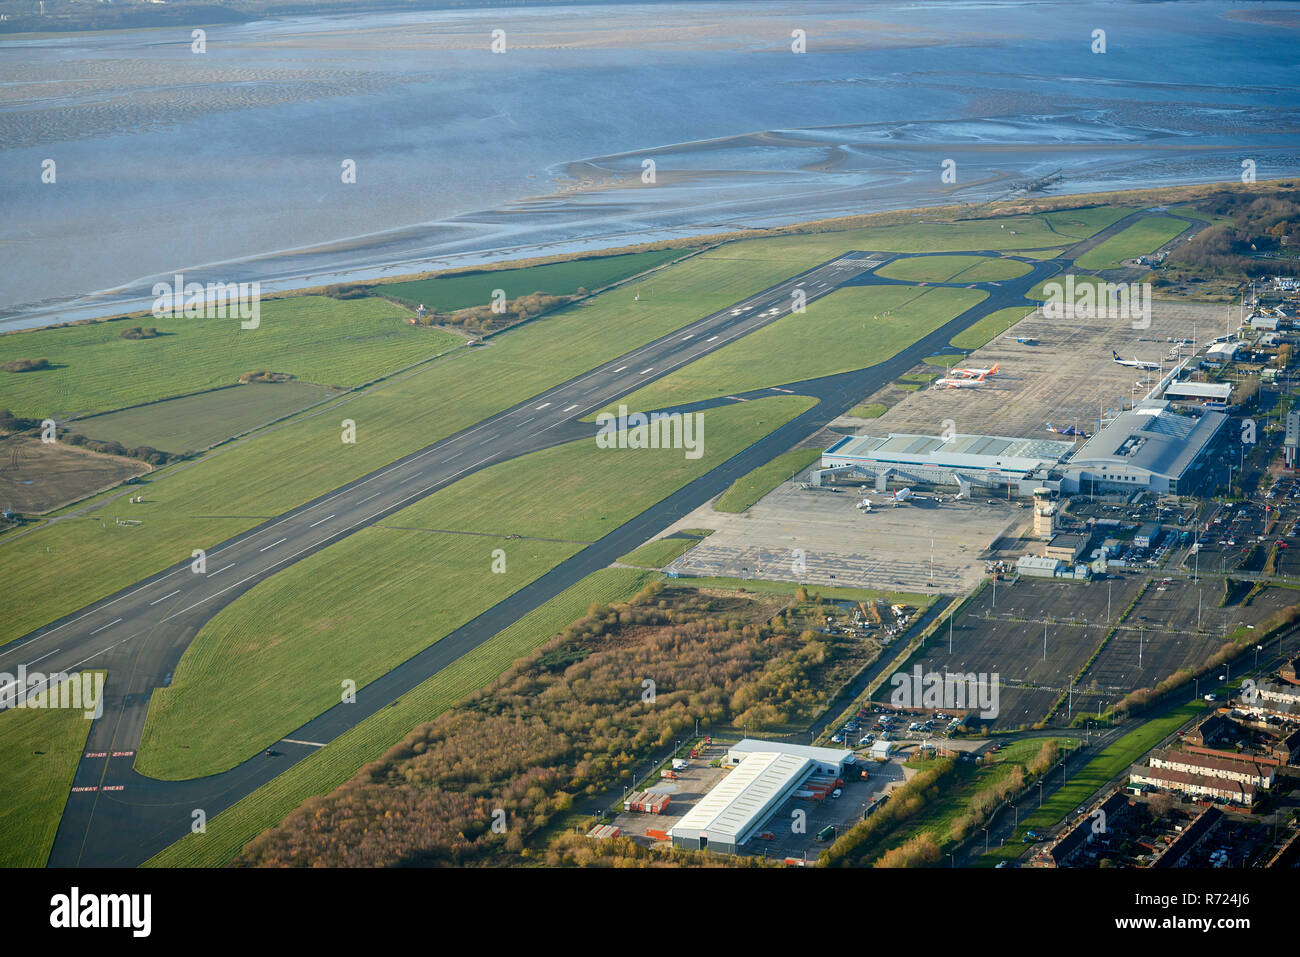 An aerial view of Liverpool John Lennon Airport, North West England, UK Stock Photo